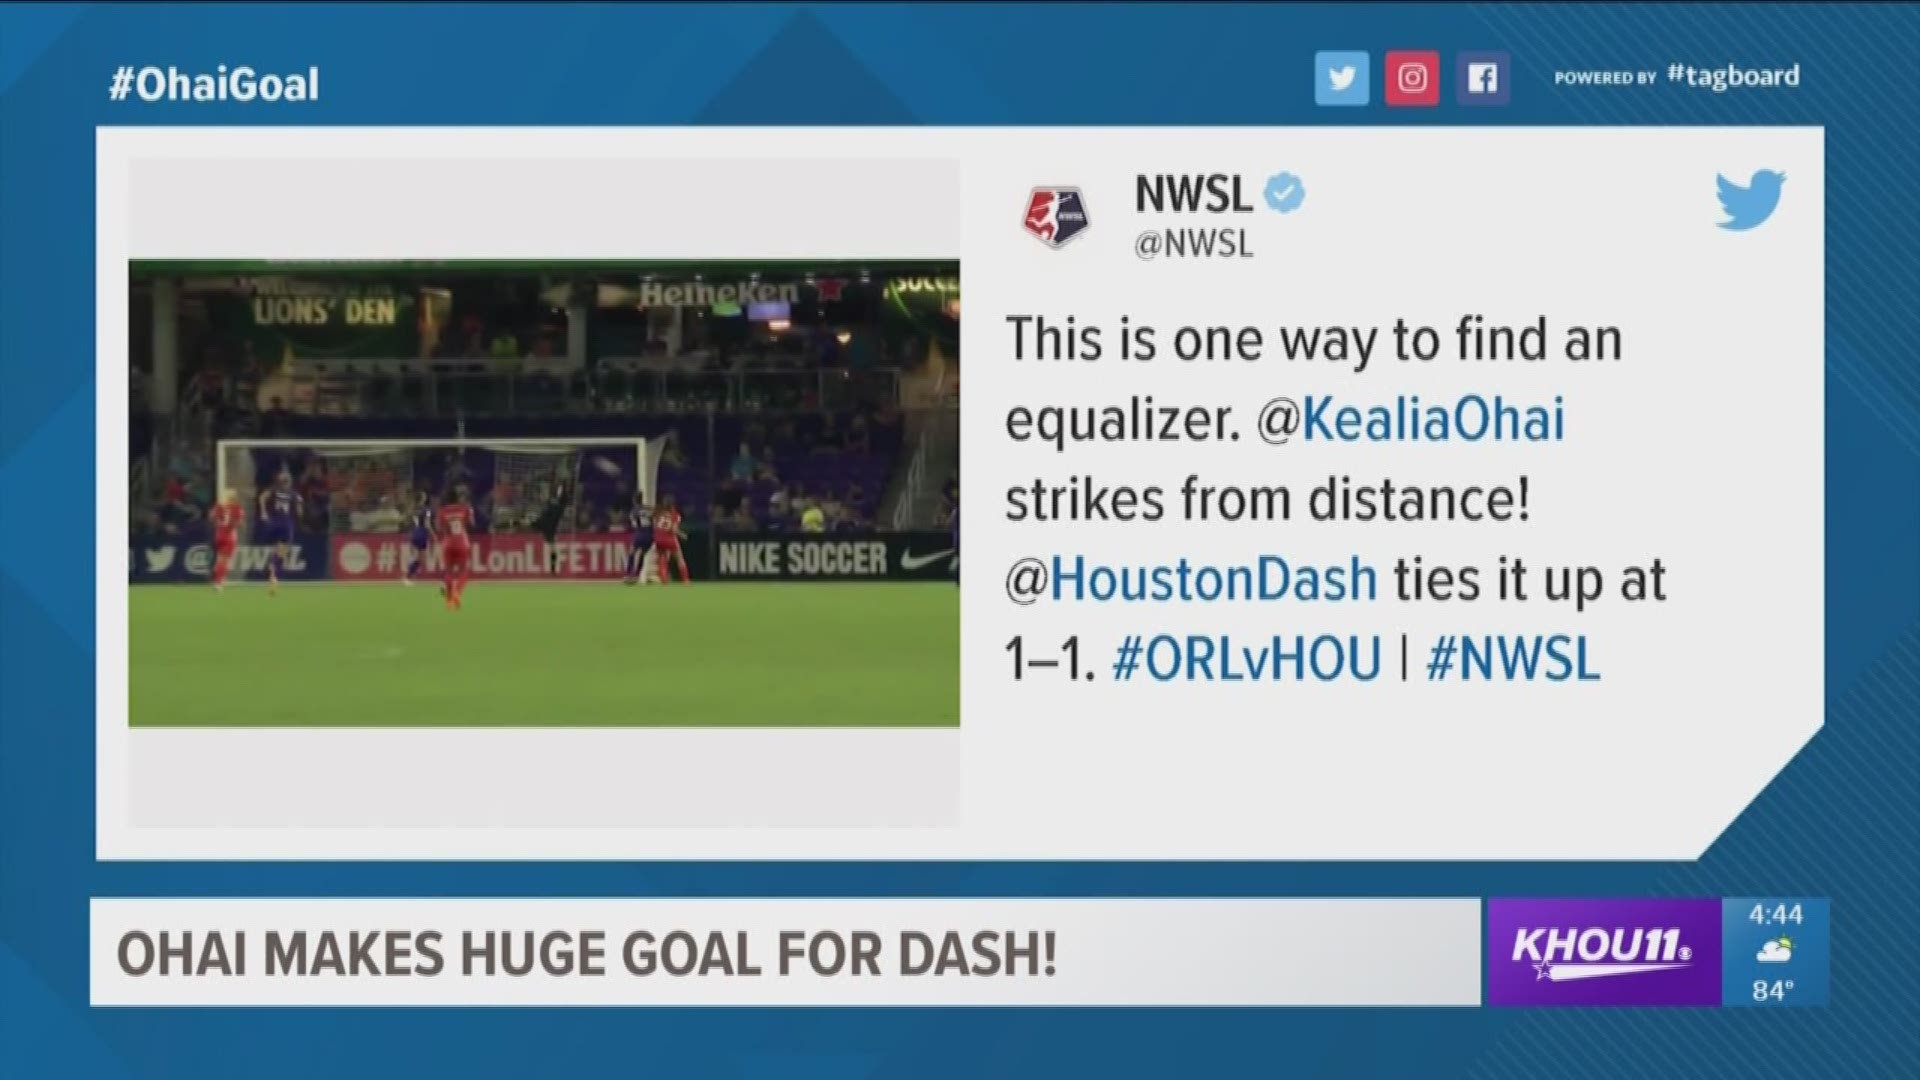 An amazing play by Kaleia Ohai, who scored a goal to help the Houston Dash tie Orlando 1-1. It's the same field where Ohai tore her ACL in 2017, ending her season.